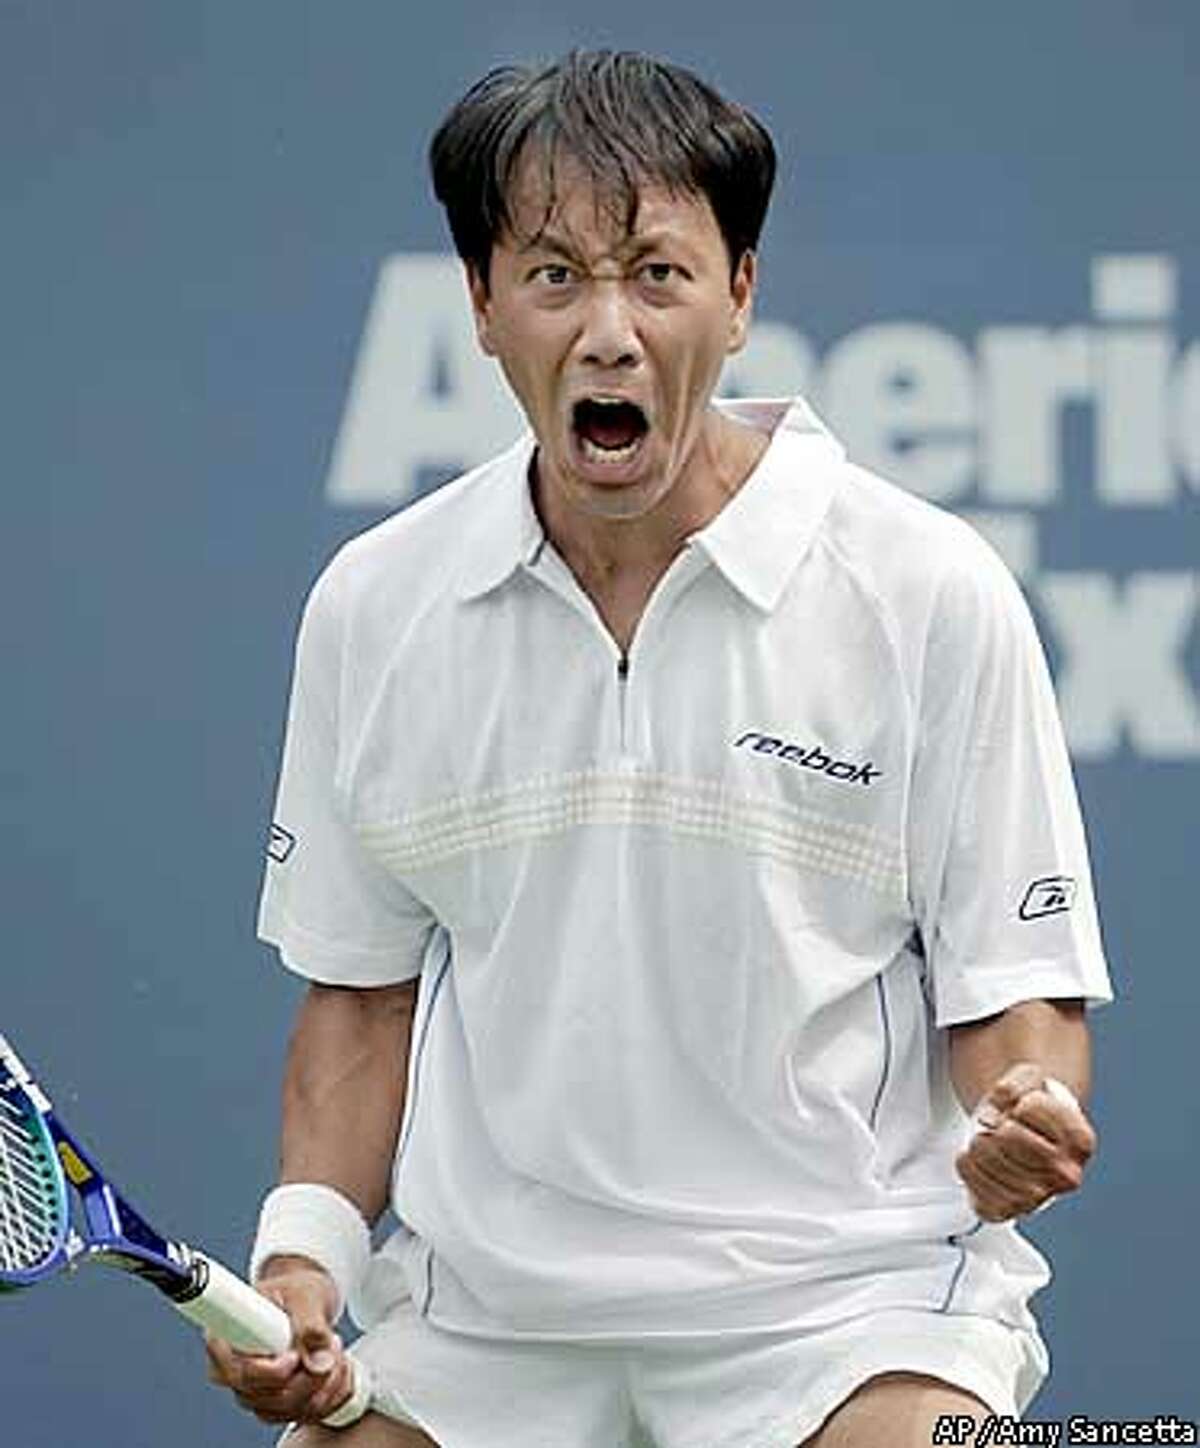 engagement Fordi sydvest SIEBEL OPEN / Michael Chang / The little player with the big heart